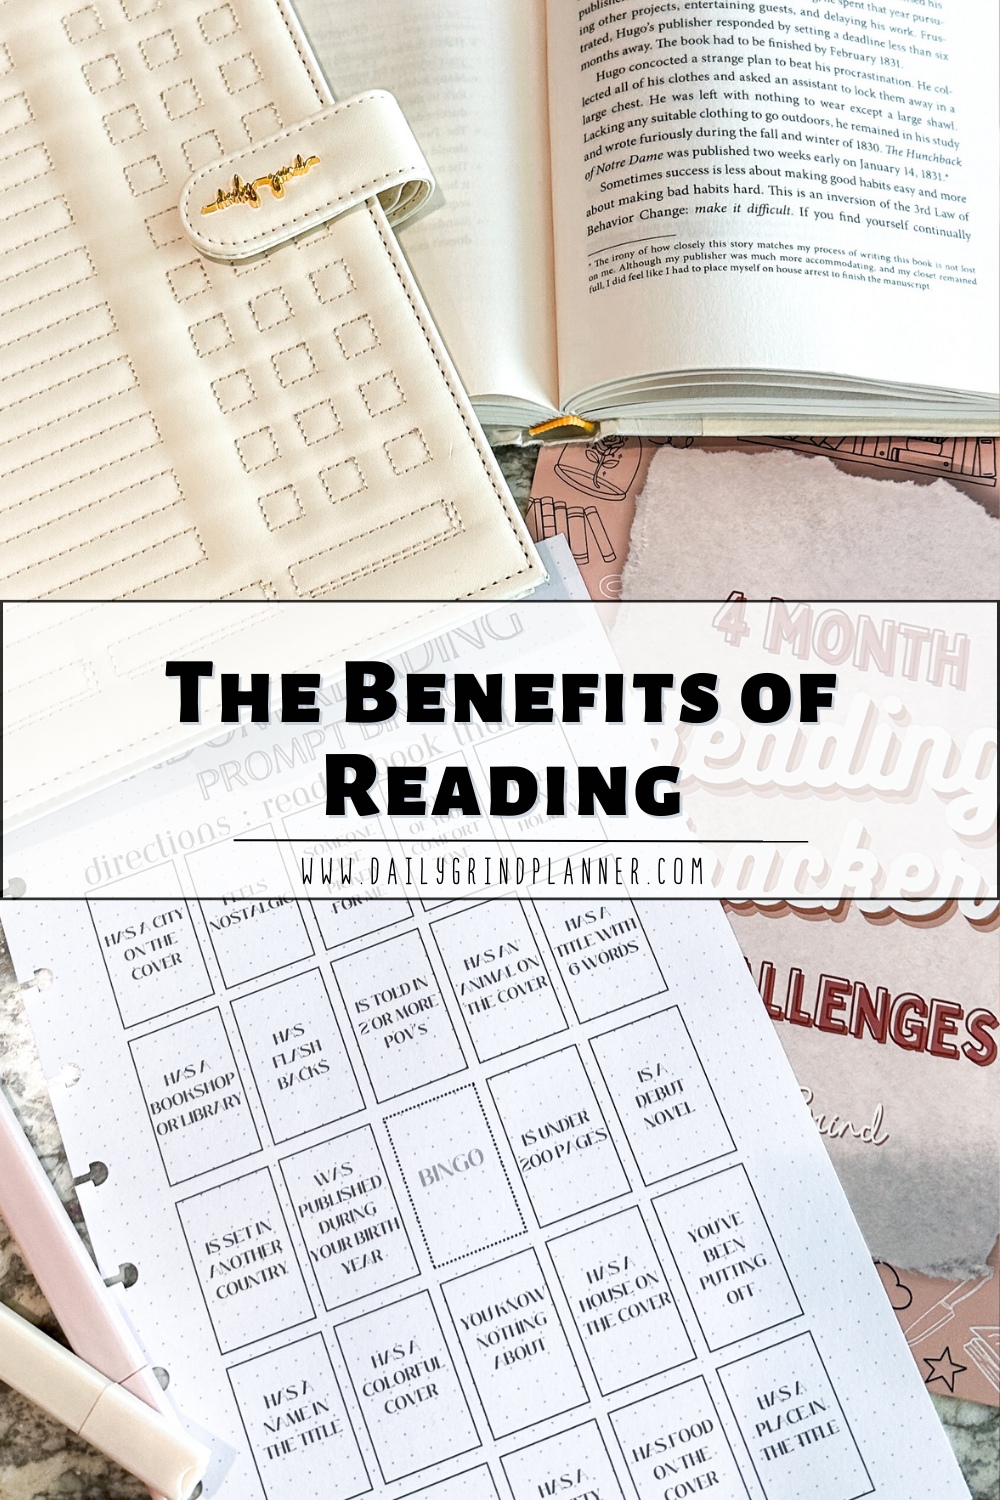 The Benefits of Reading